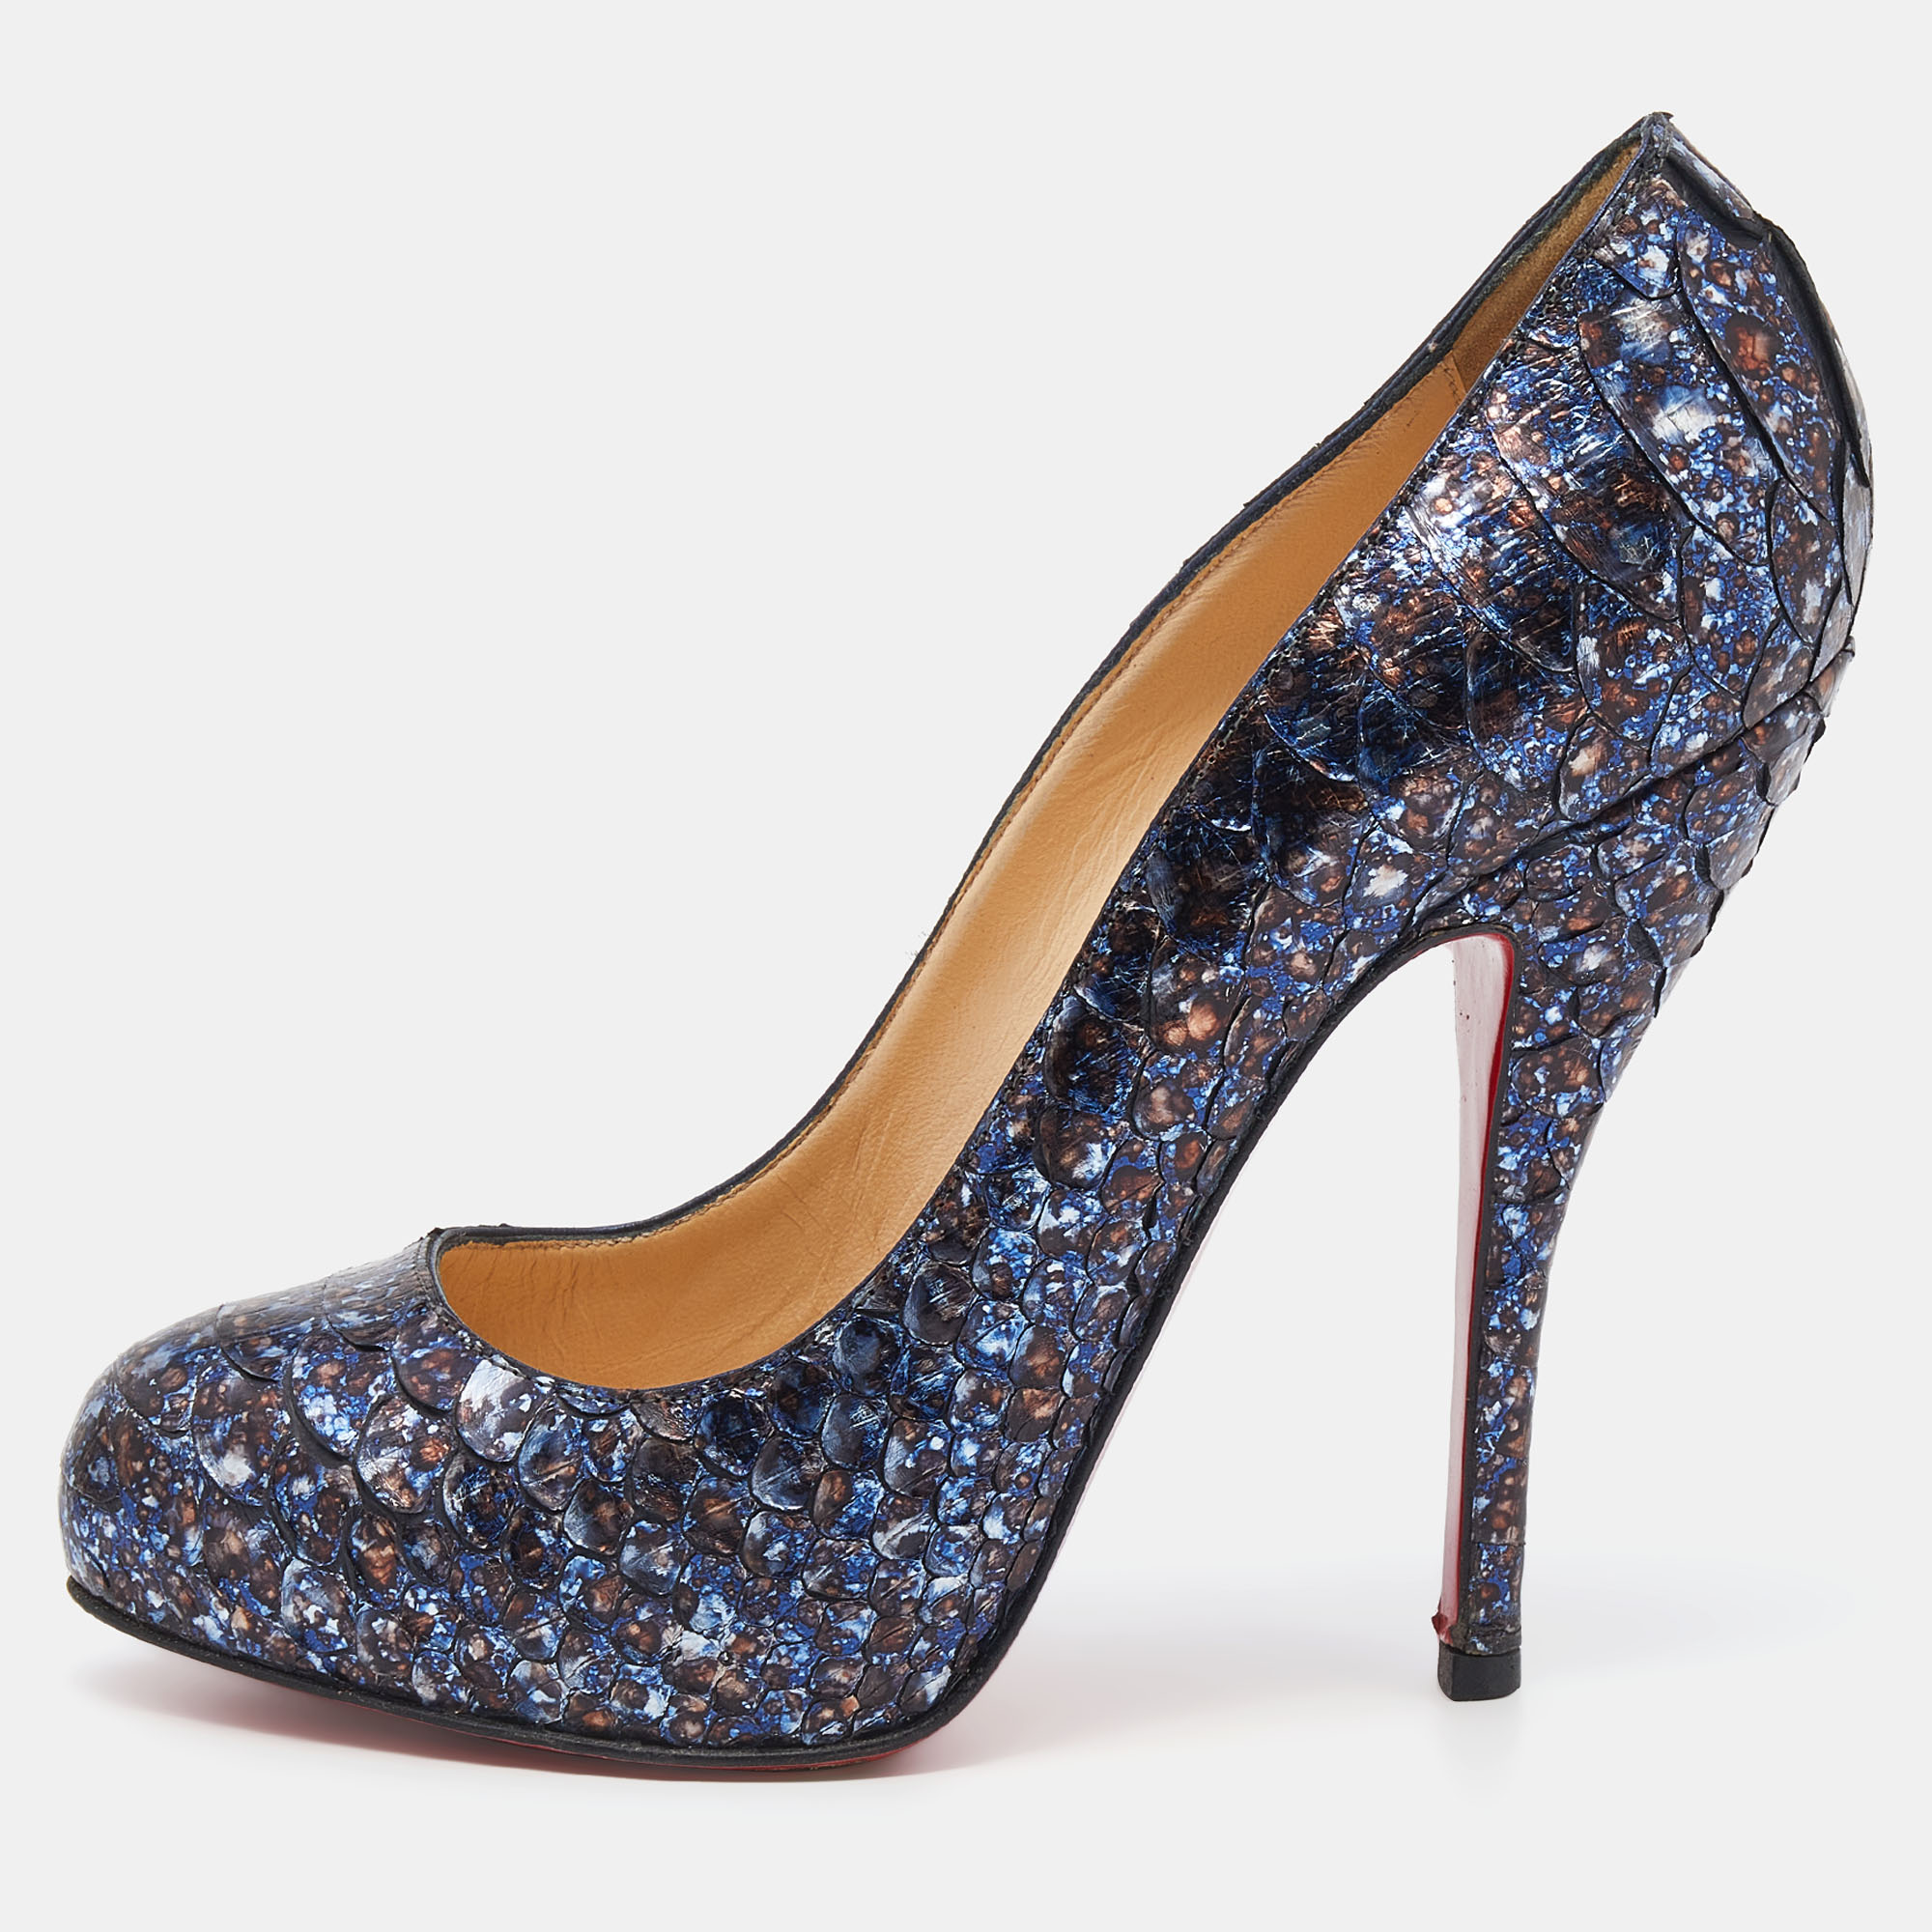 Pre-owned Christian Louboutin Navy Python Leather Simple Pumps Size 35.5 ModeSens